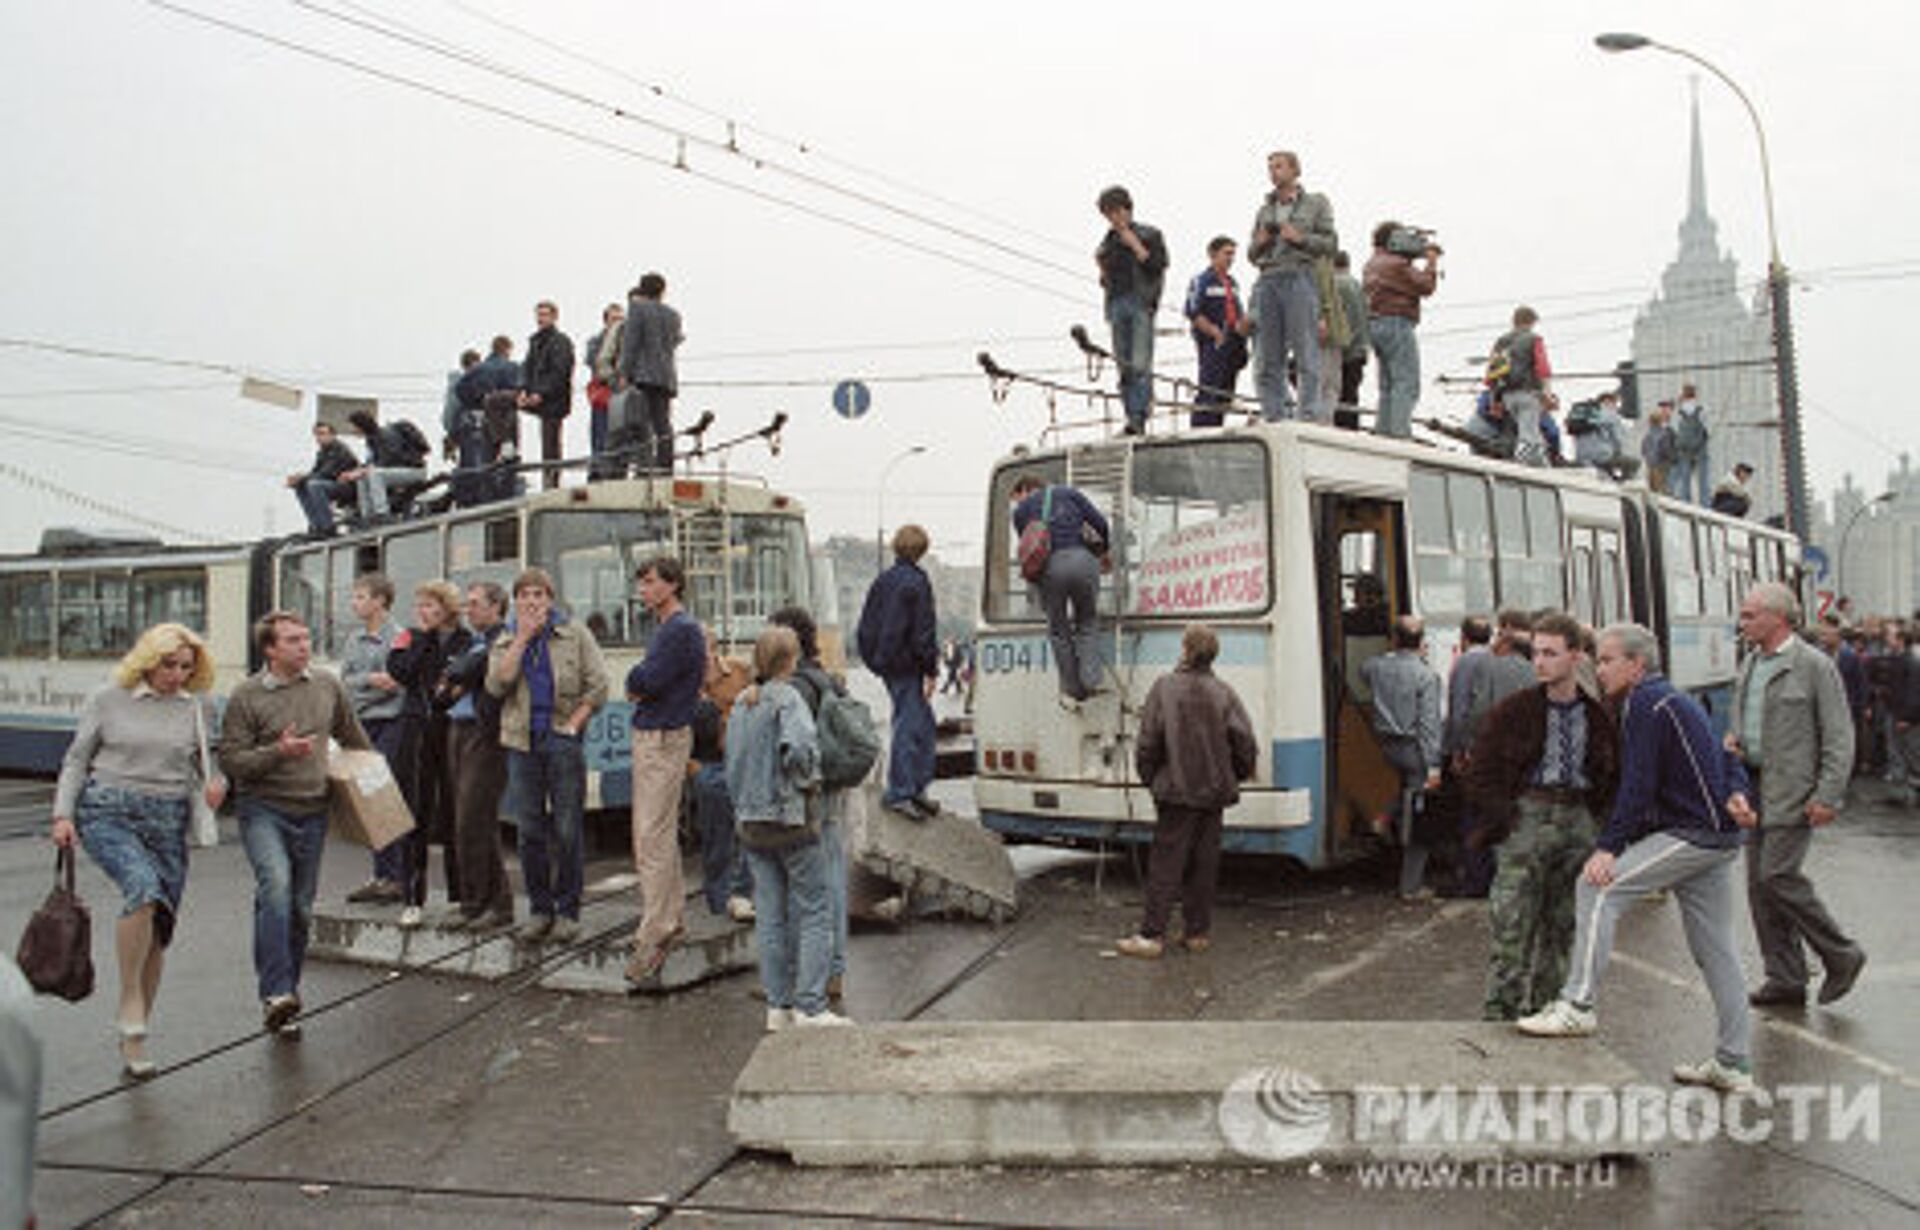 Buses and barricades on Moscow’s streets: August 19, 1991 - Sputnik International, 1920, 07.09.2021